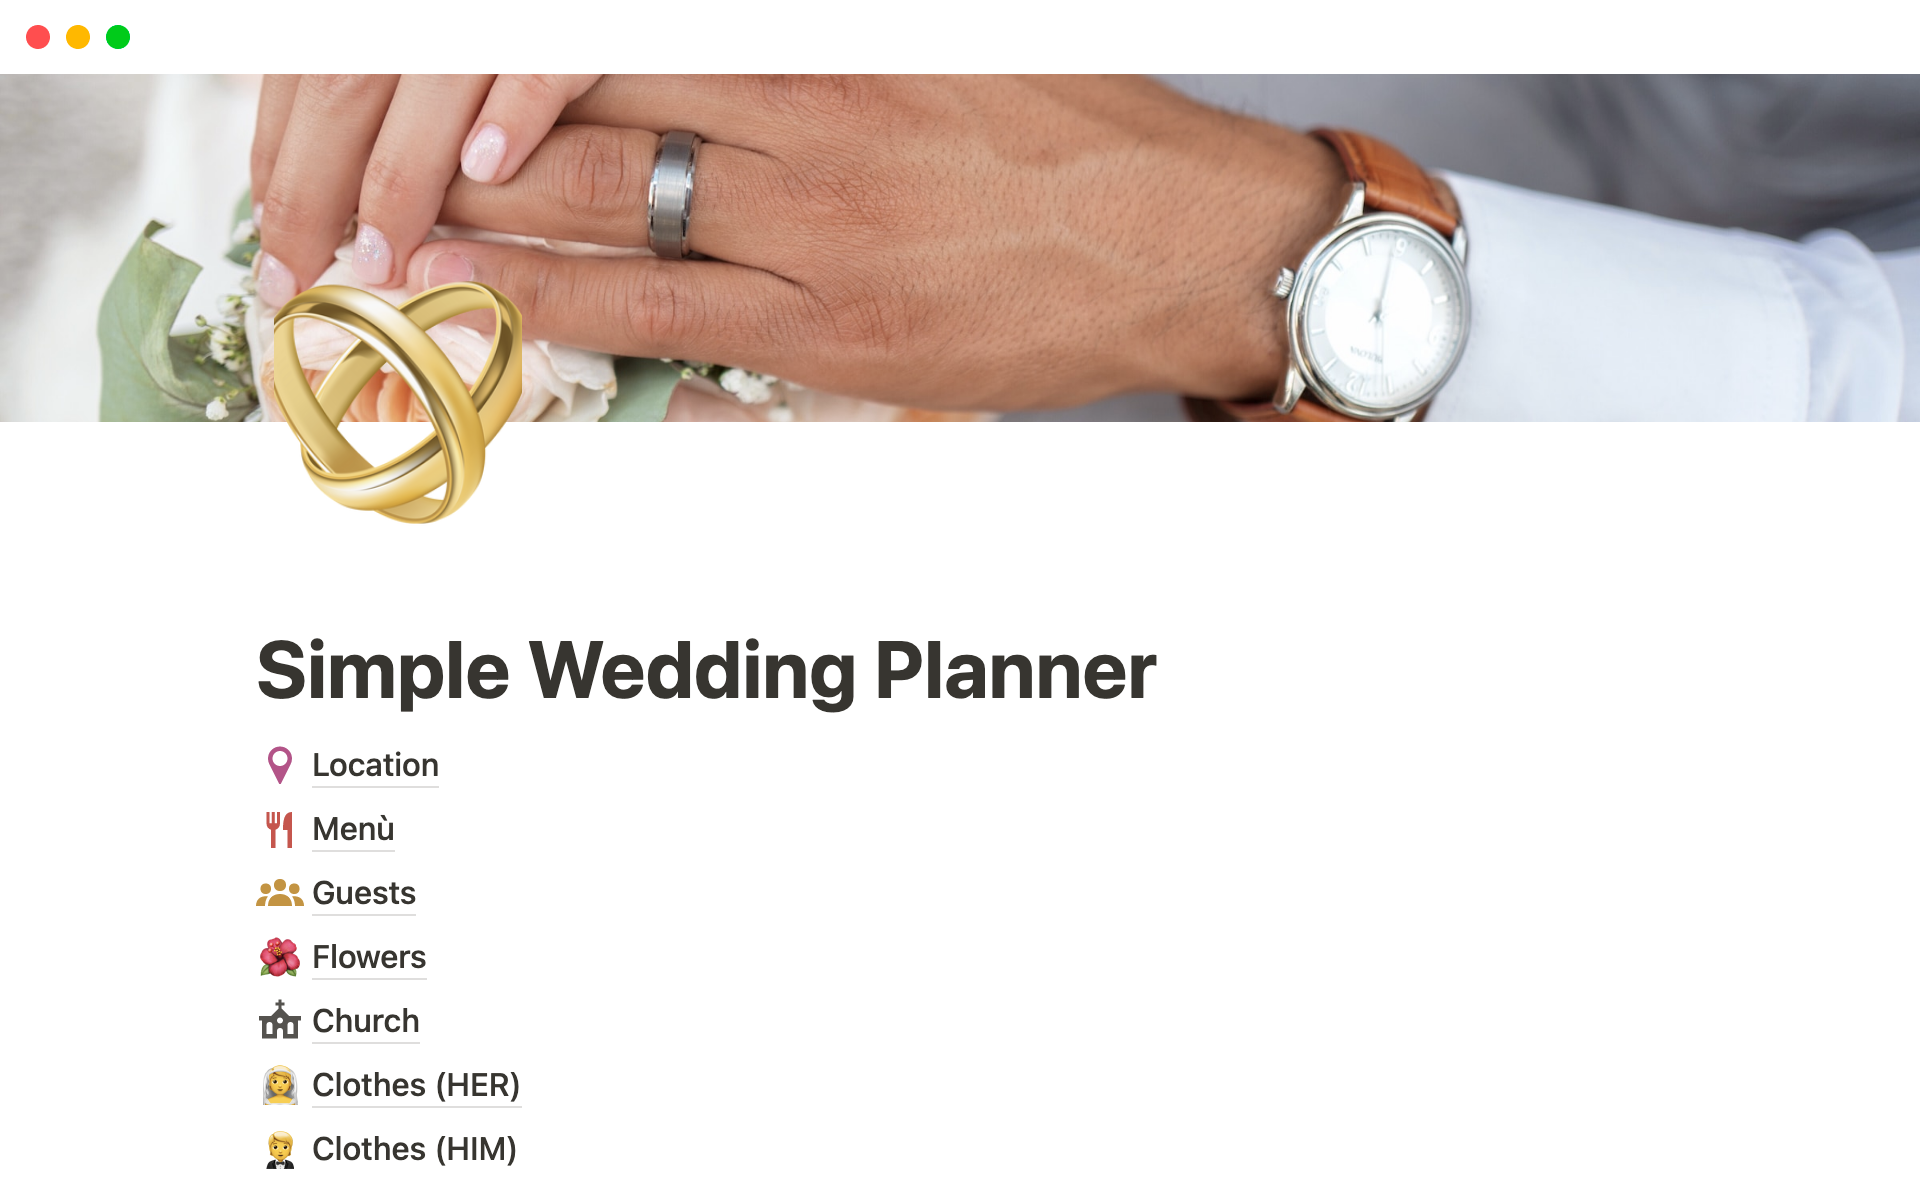 This template is designed to simplify the wedding planning process, making it easier to plan the big day.